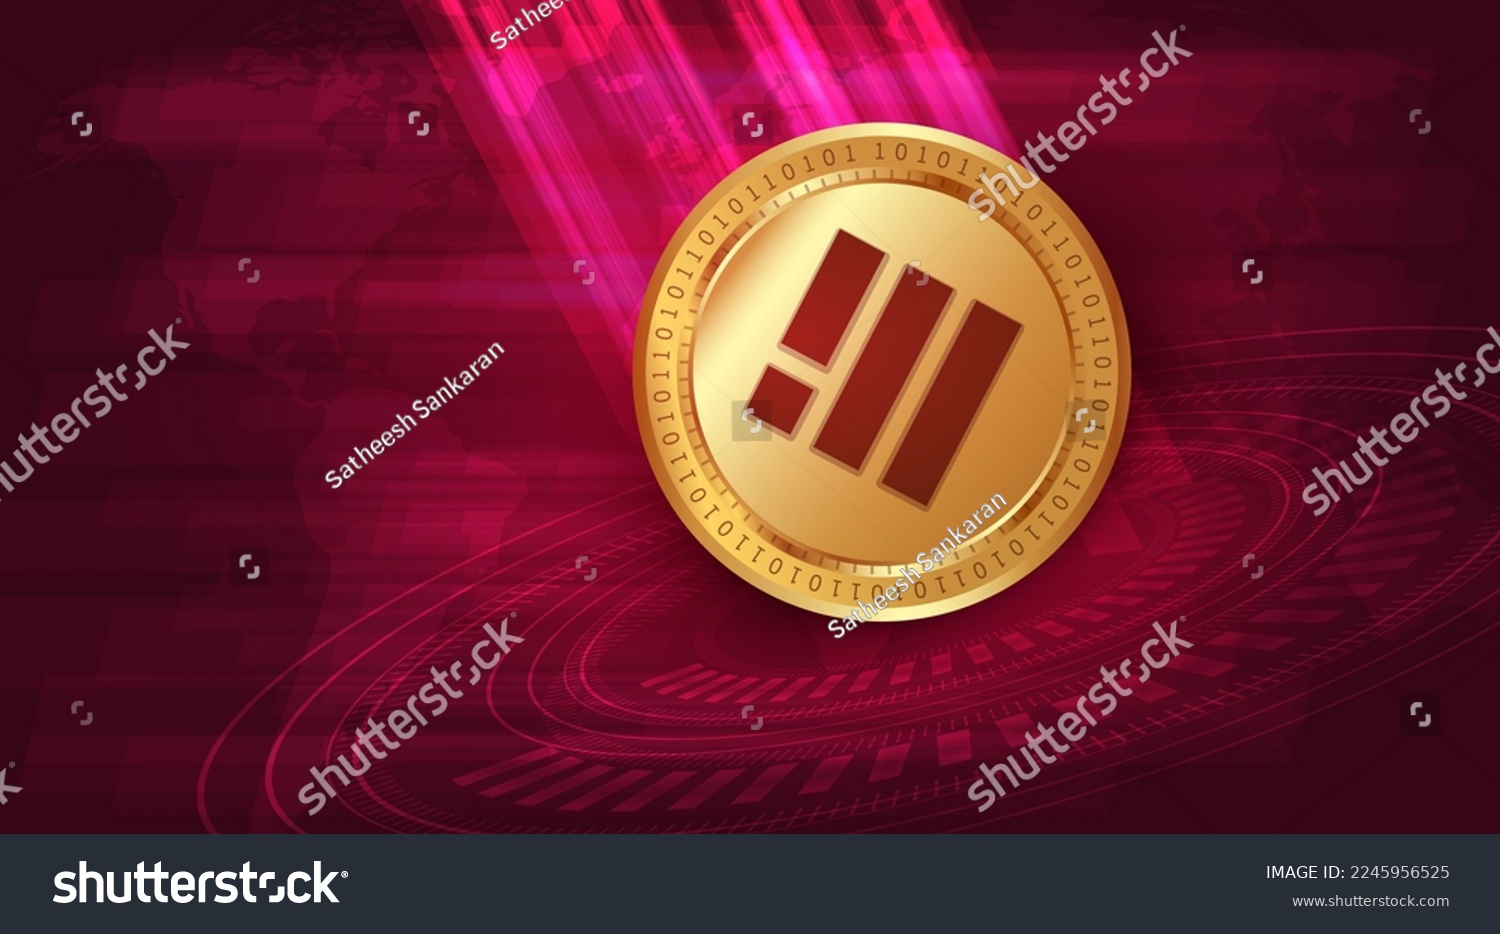 SVG of Binance USD (BUSD) crypto currency banner and background svg